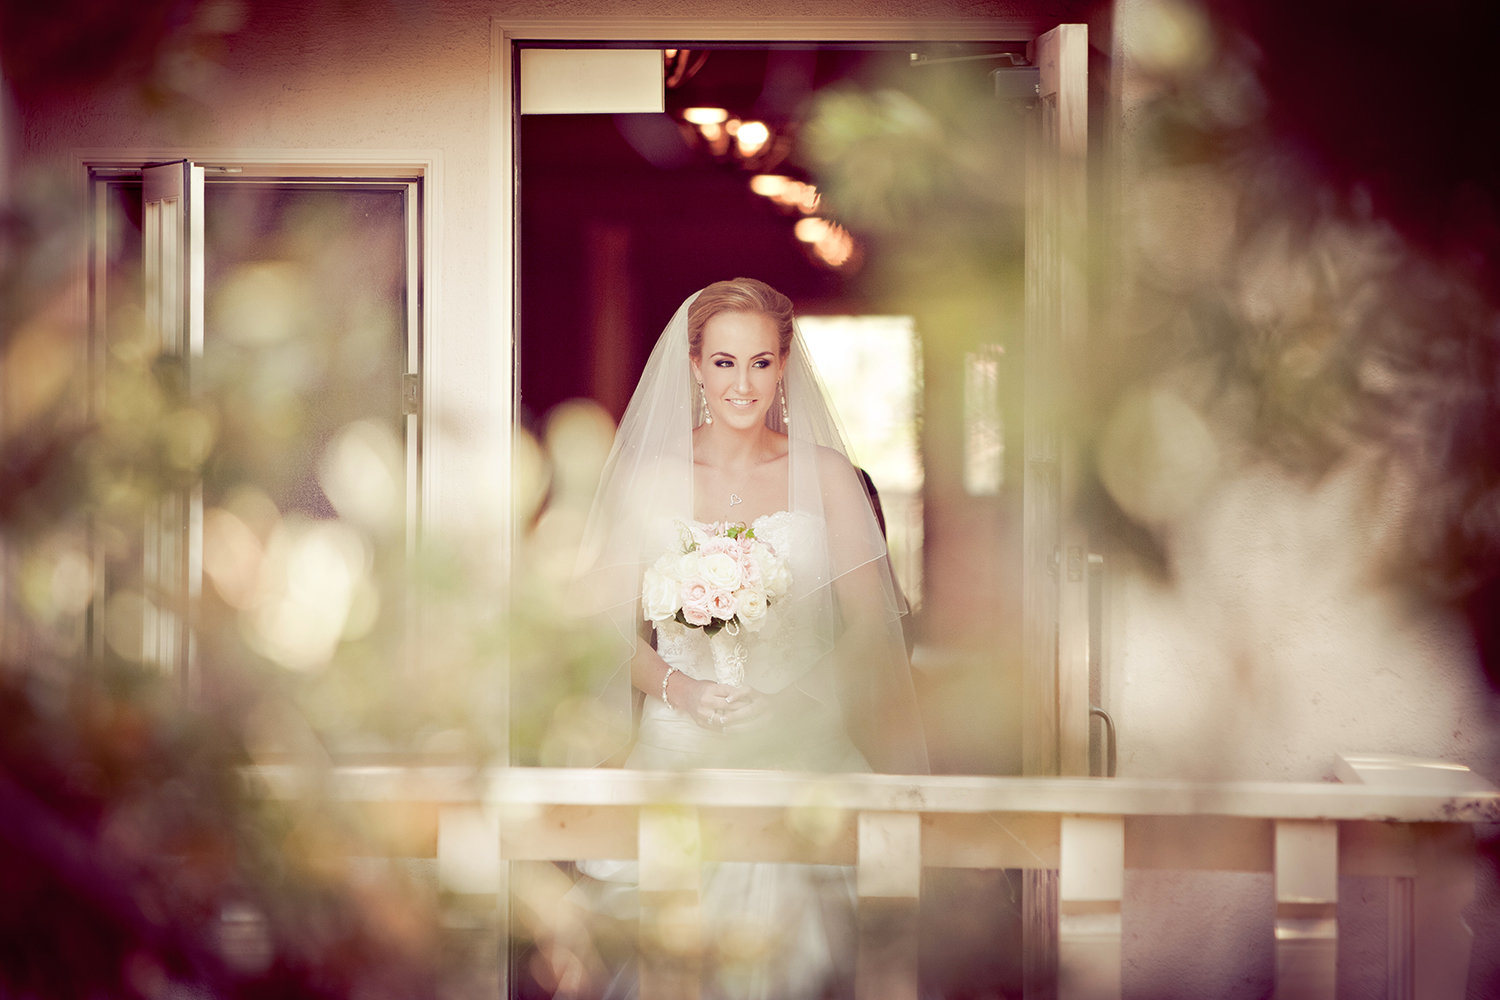 Rustic and candid moment of the bride before the ceremony